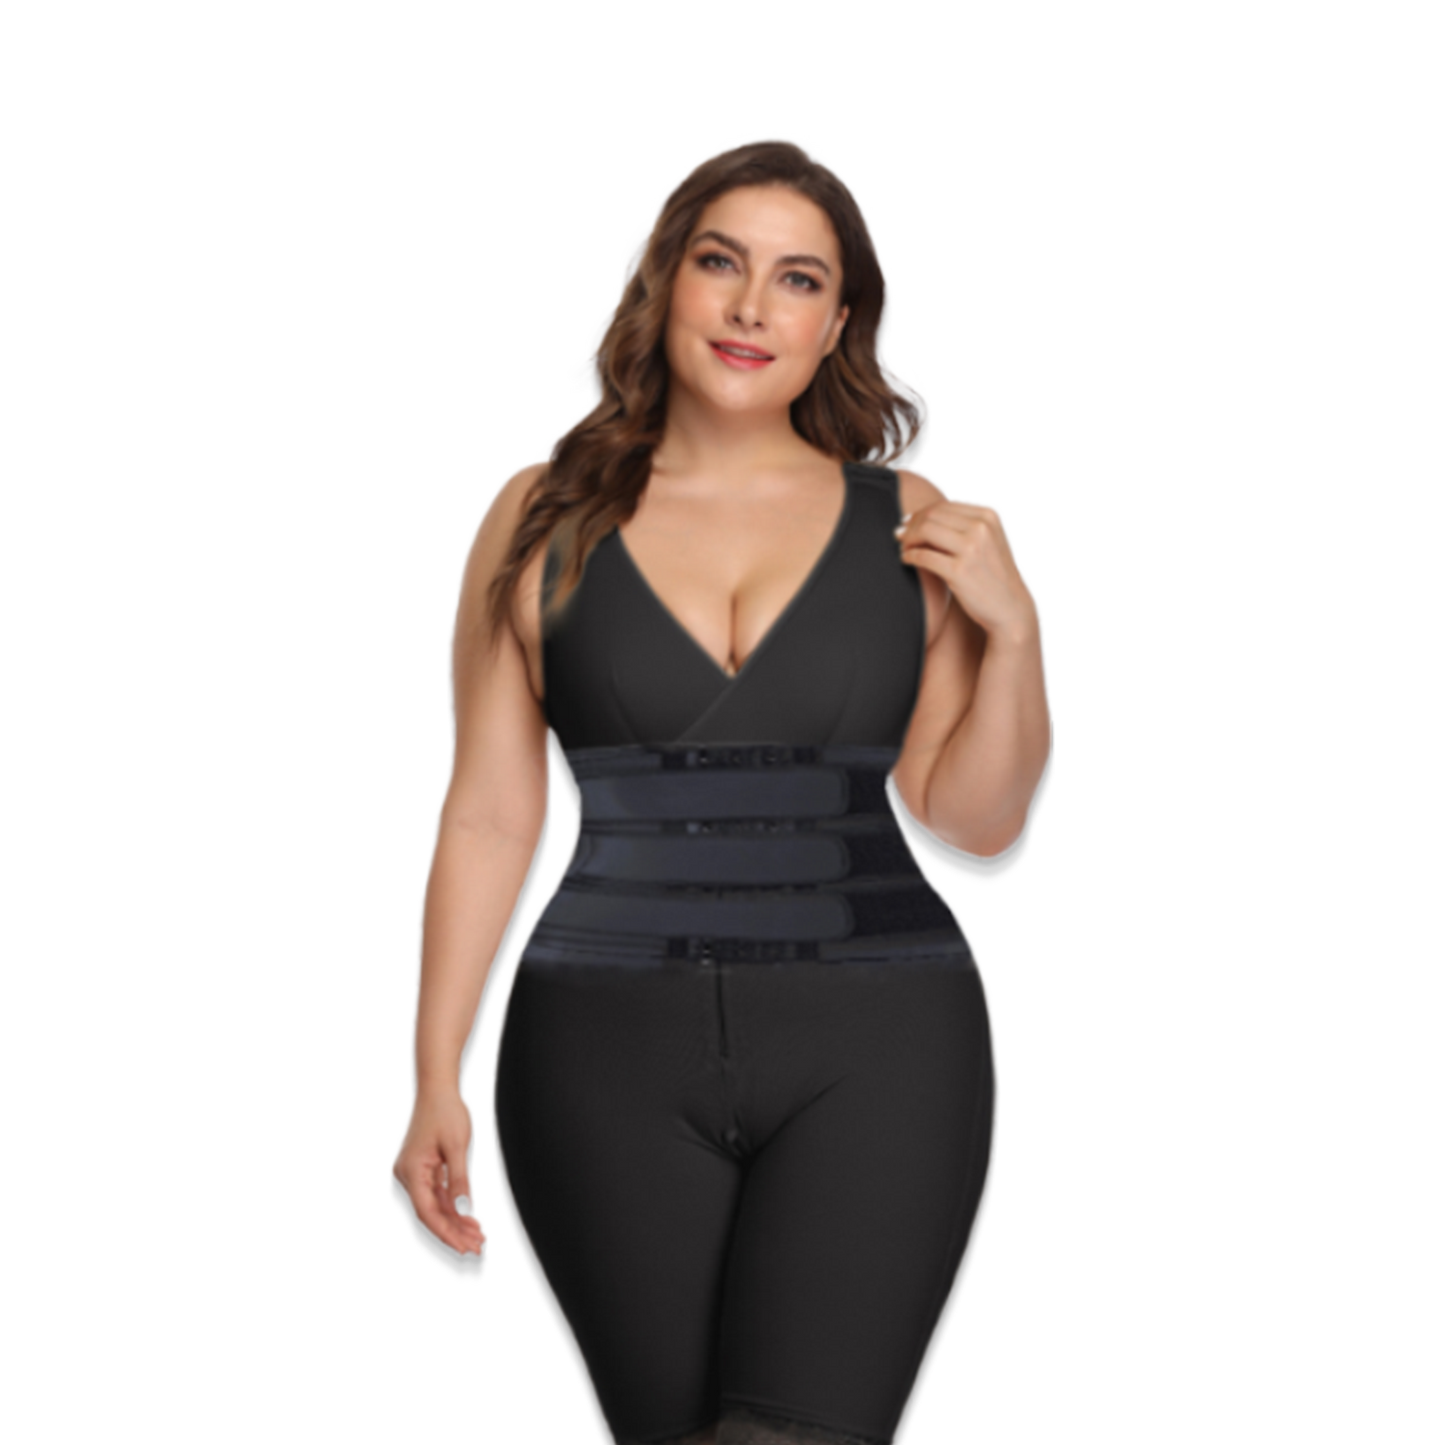 THREE BELT women waist trainer to lose weight while working out